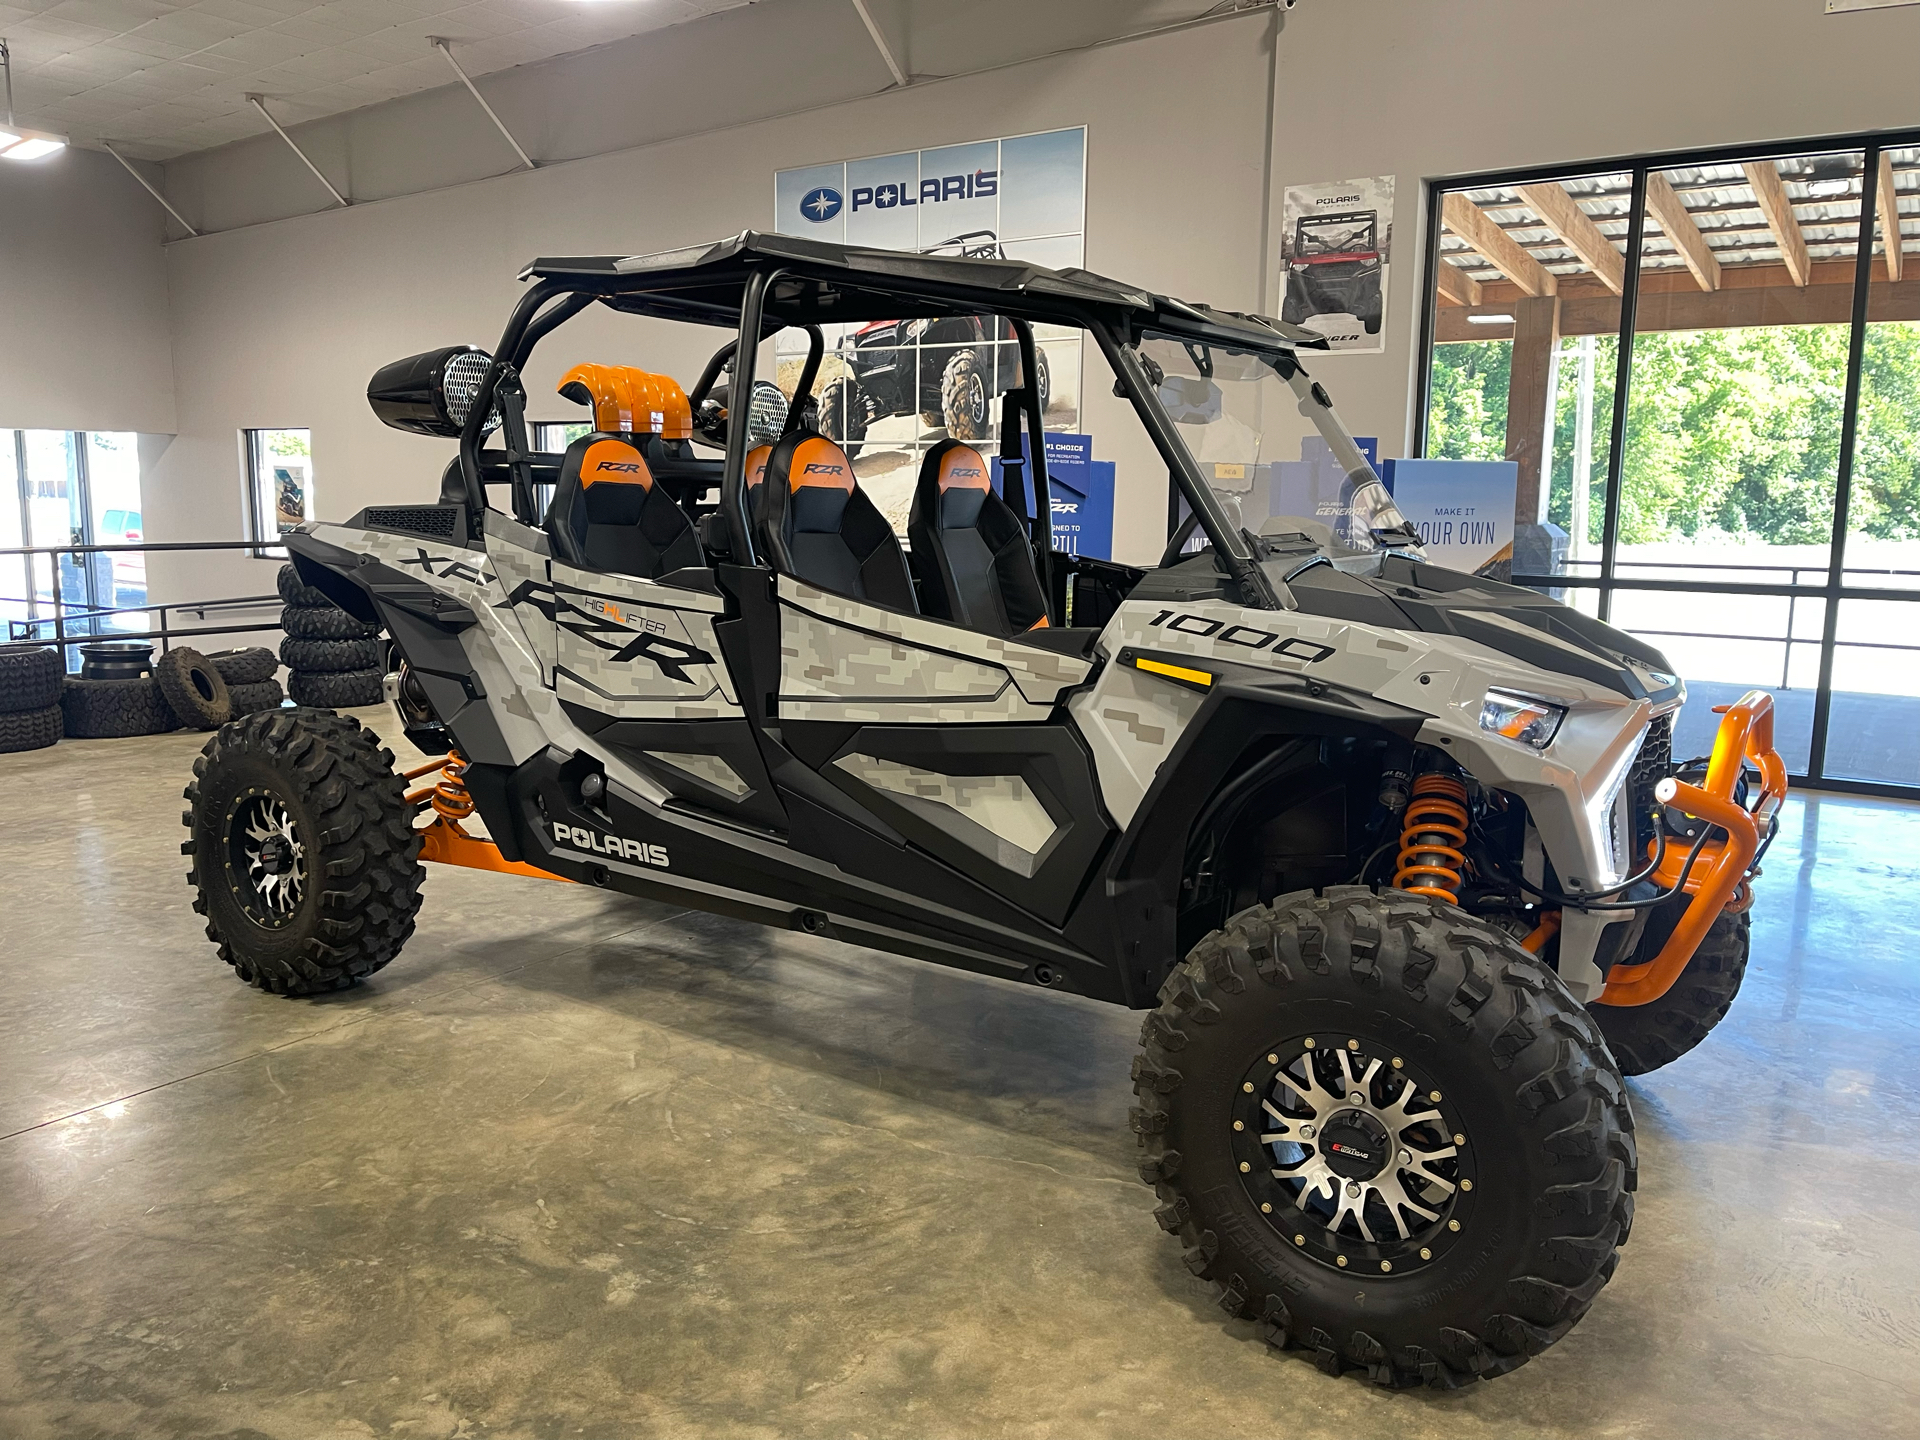 2021 Polaris RZR XP 4 1000 High Lifter in Leland, Mississippi - Photo 3